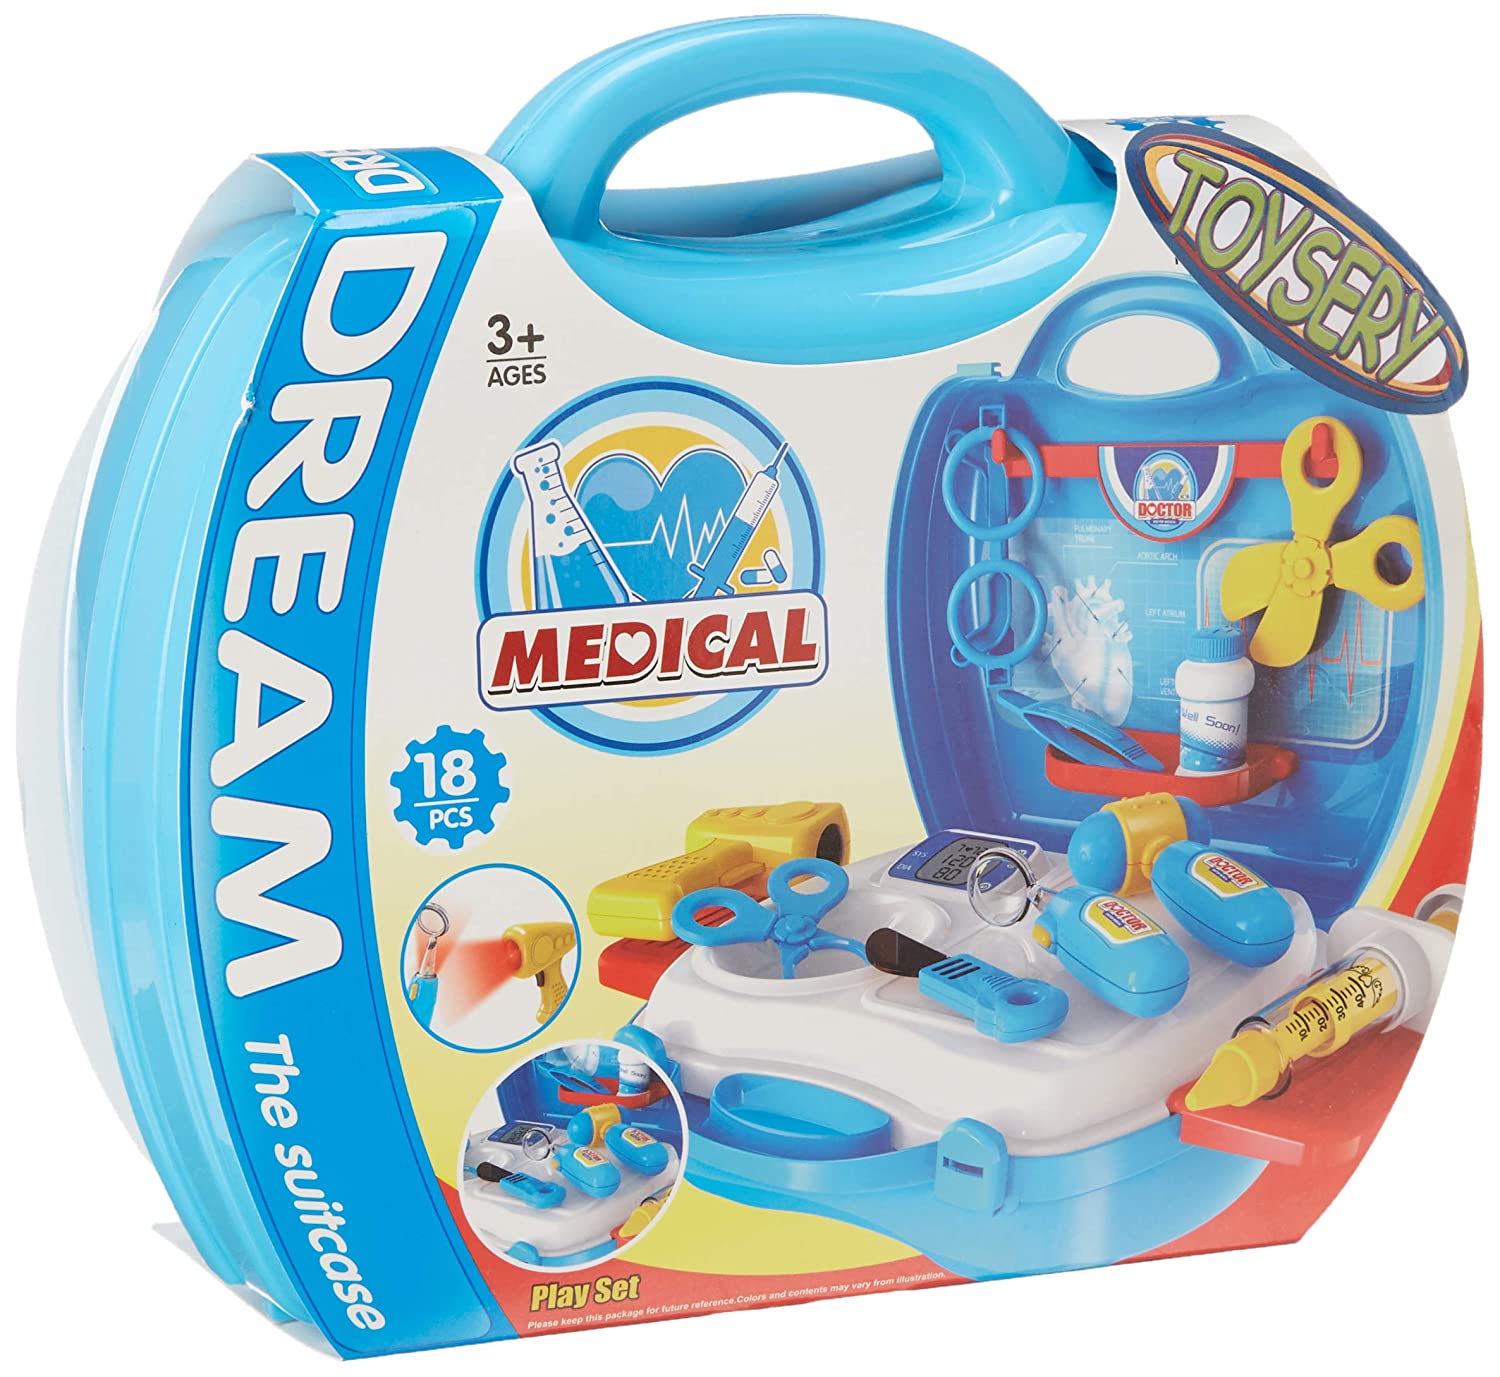 Top 9 Best Toy Doctor Kits Reviews in 2022 8